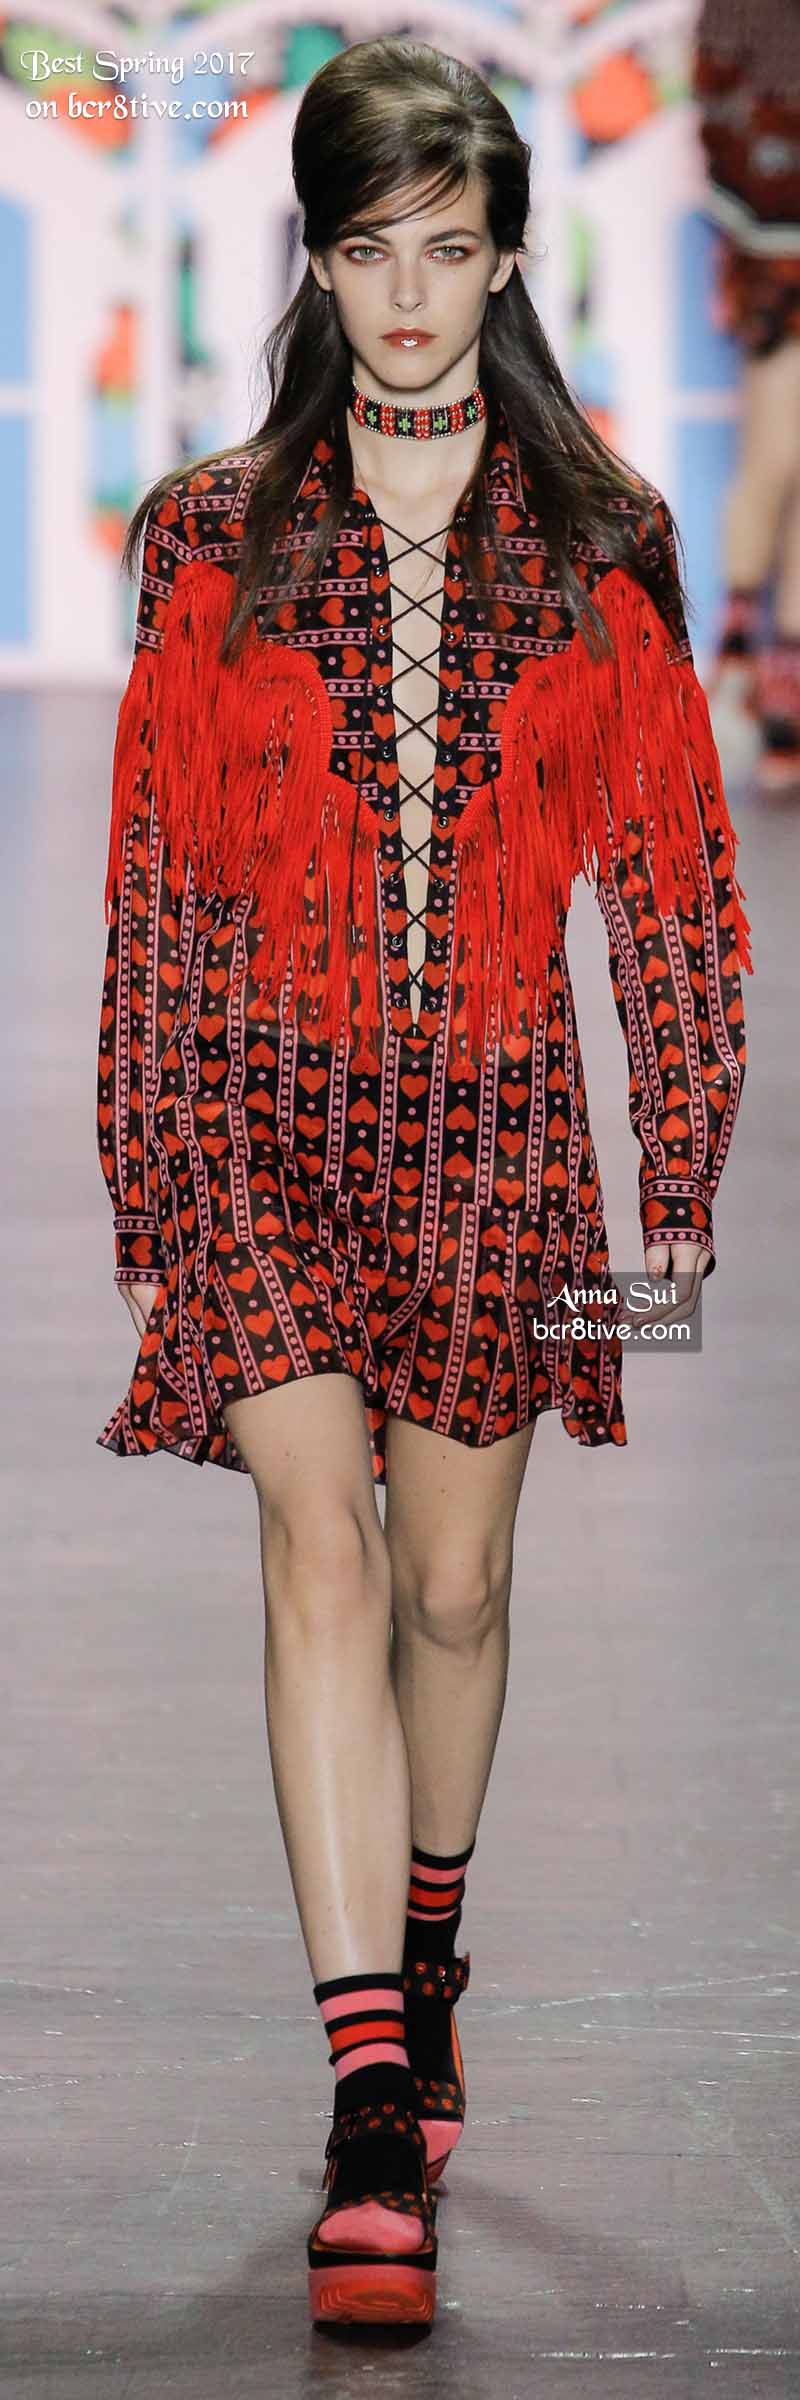 Anna Sui - The Best Looks from New York Fashion Week Spring 2017